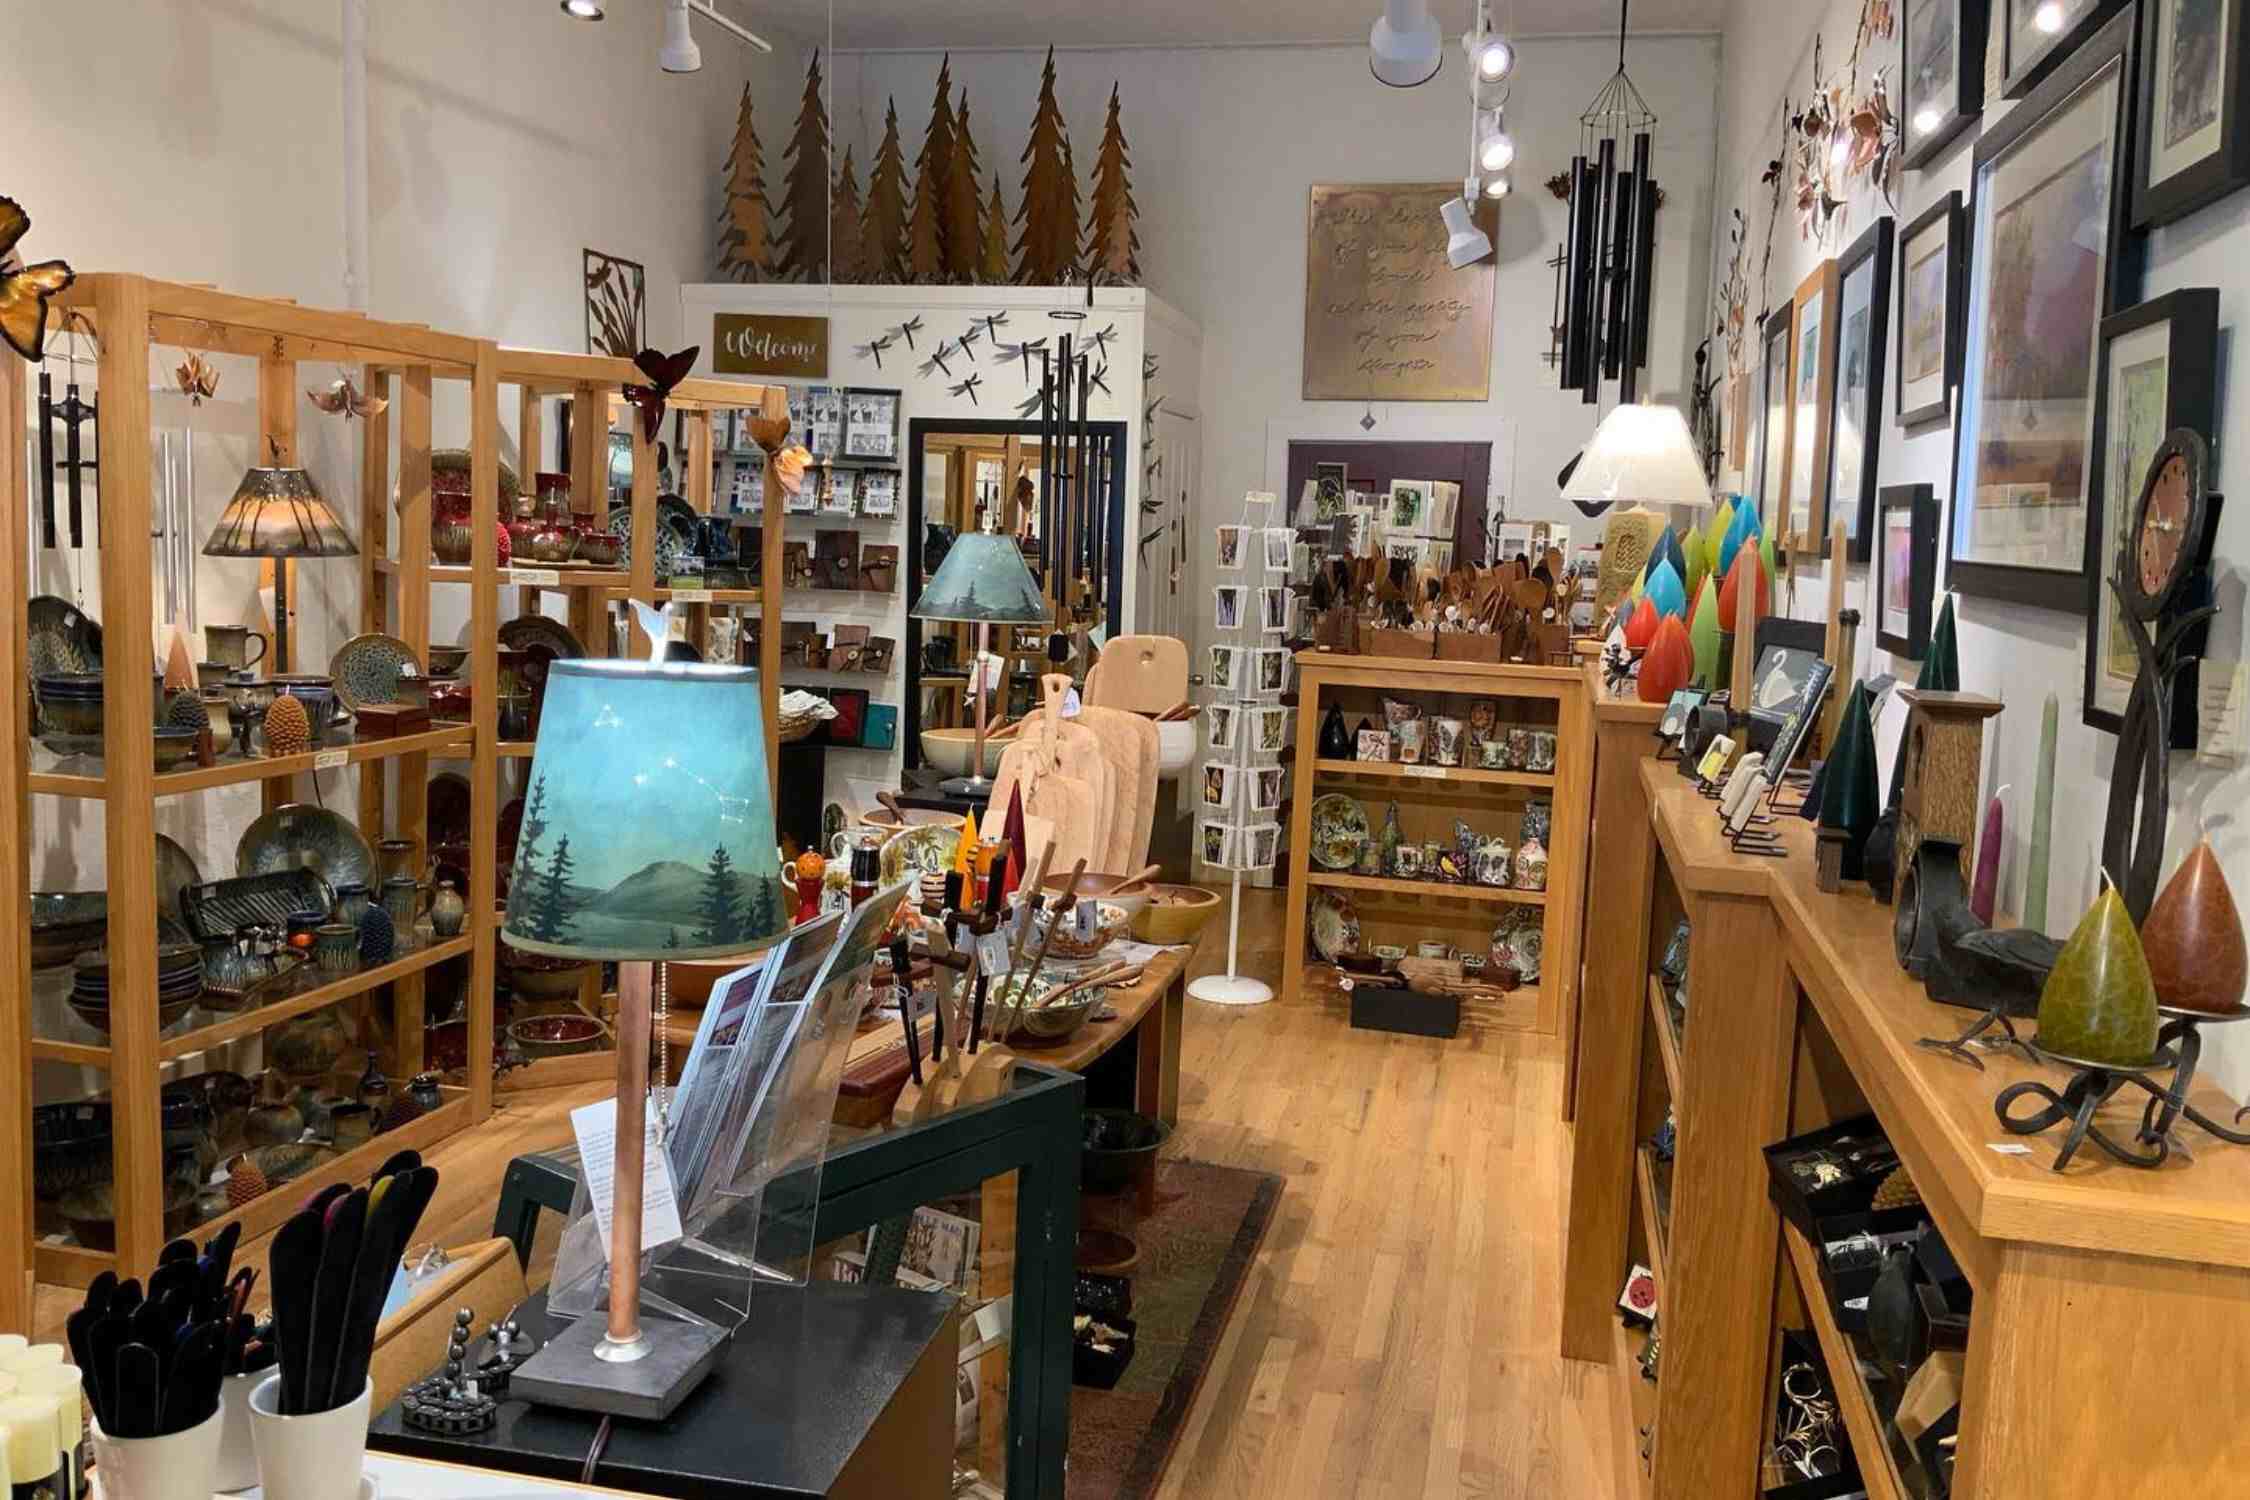 Heartwood Contemporary Crafts Gallery - best things to do in Saluda